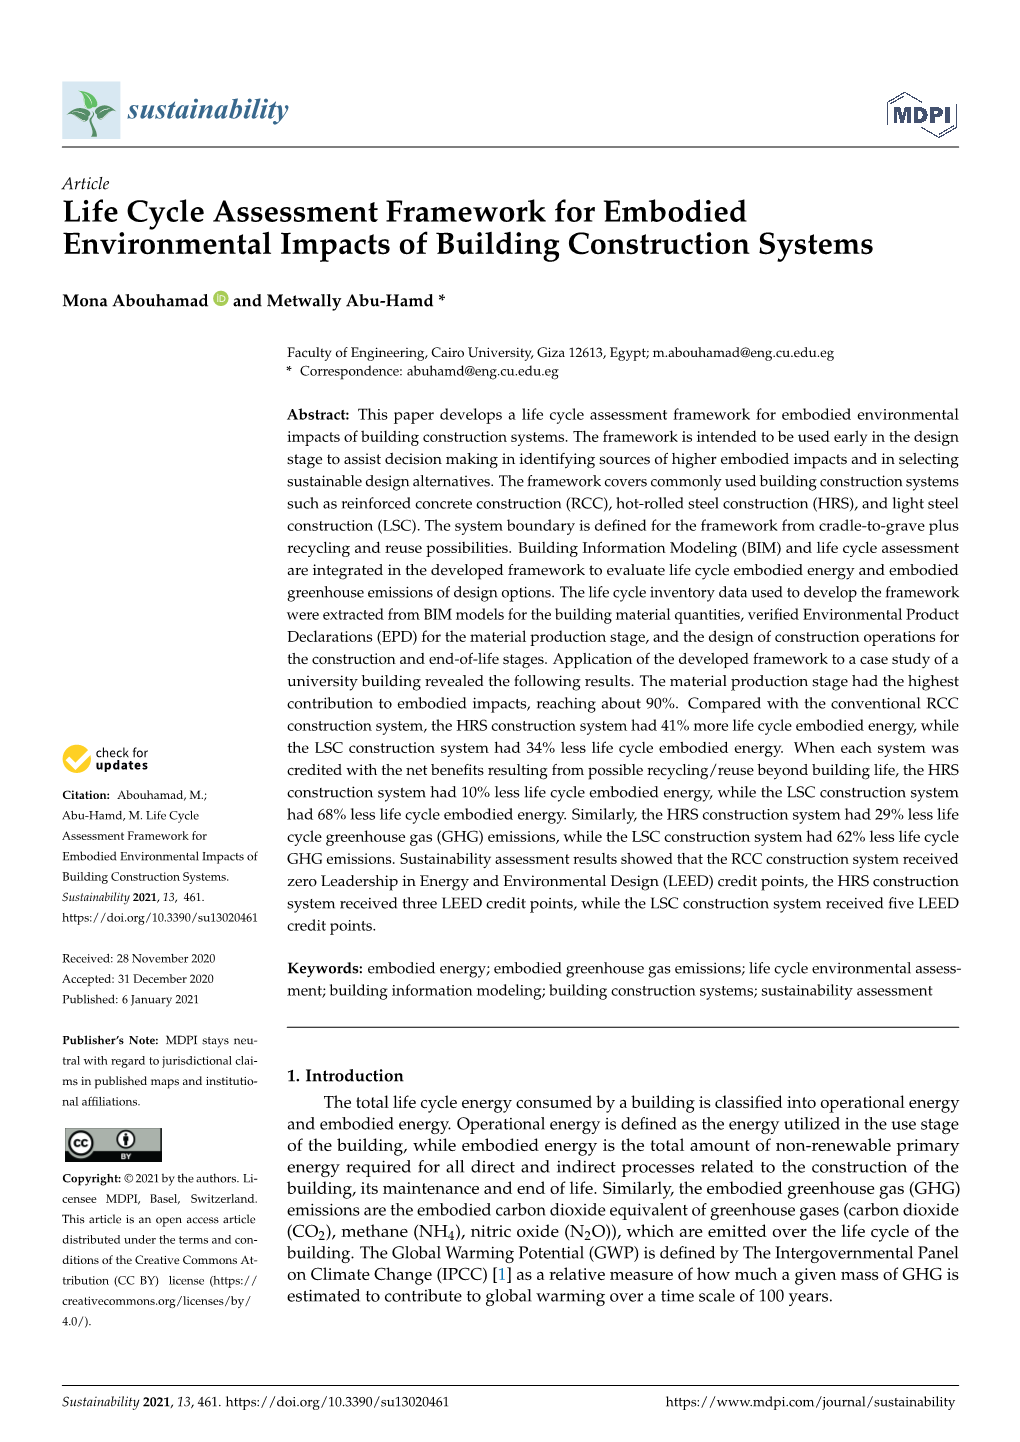 Life Cycle Assessment Framework for Embodied Environmental Impacts of Building Construction Systems